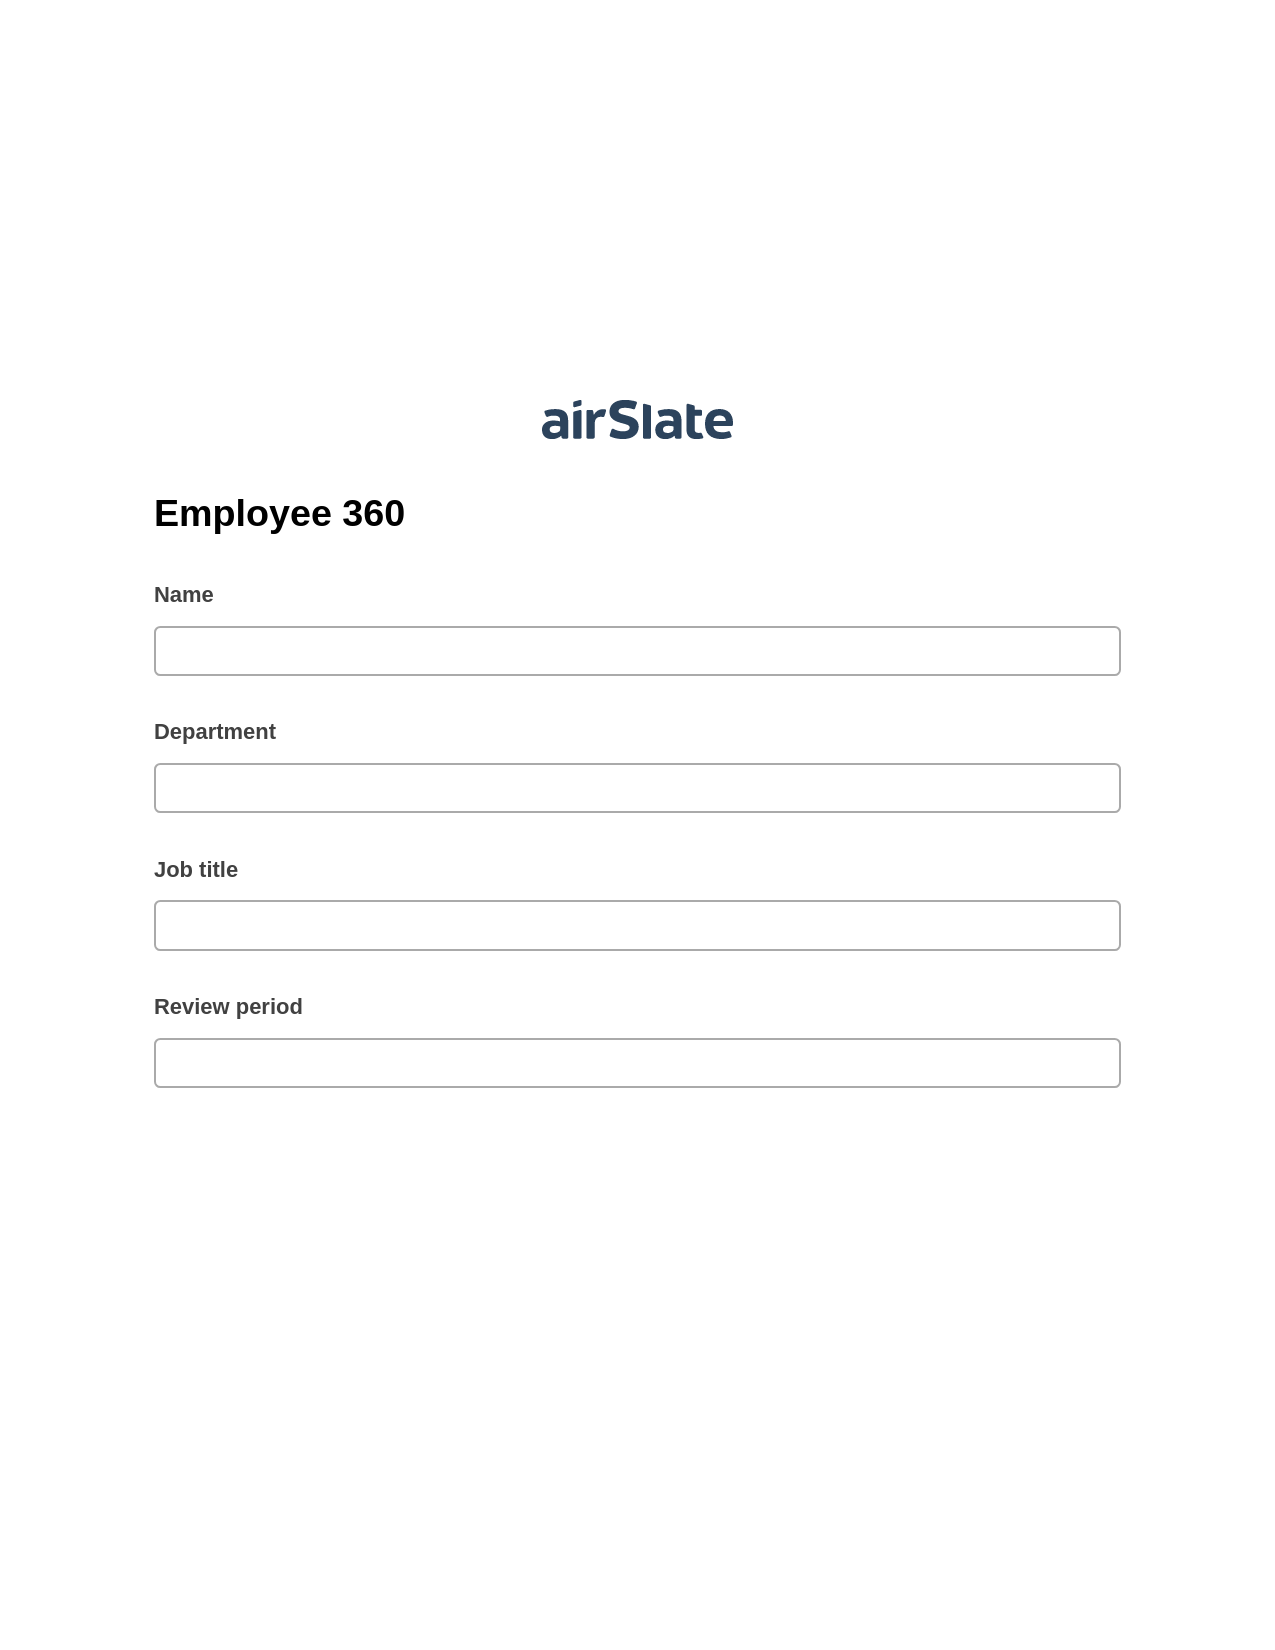 Employee 360 Pre-fill from MS Dynamics 365 Records, Update MS Dynamics 365 Record Bot, Export to MySQL Bot